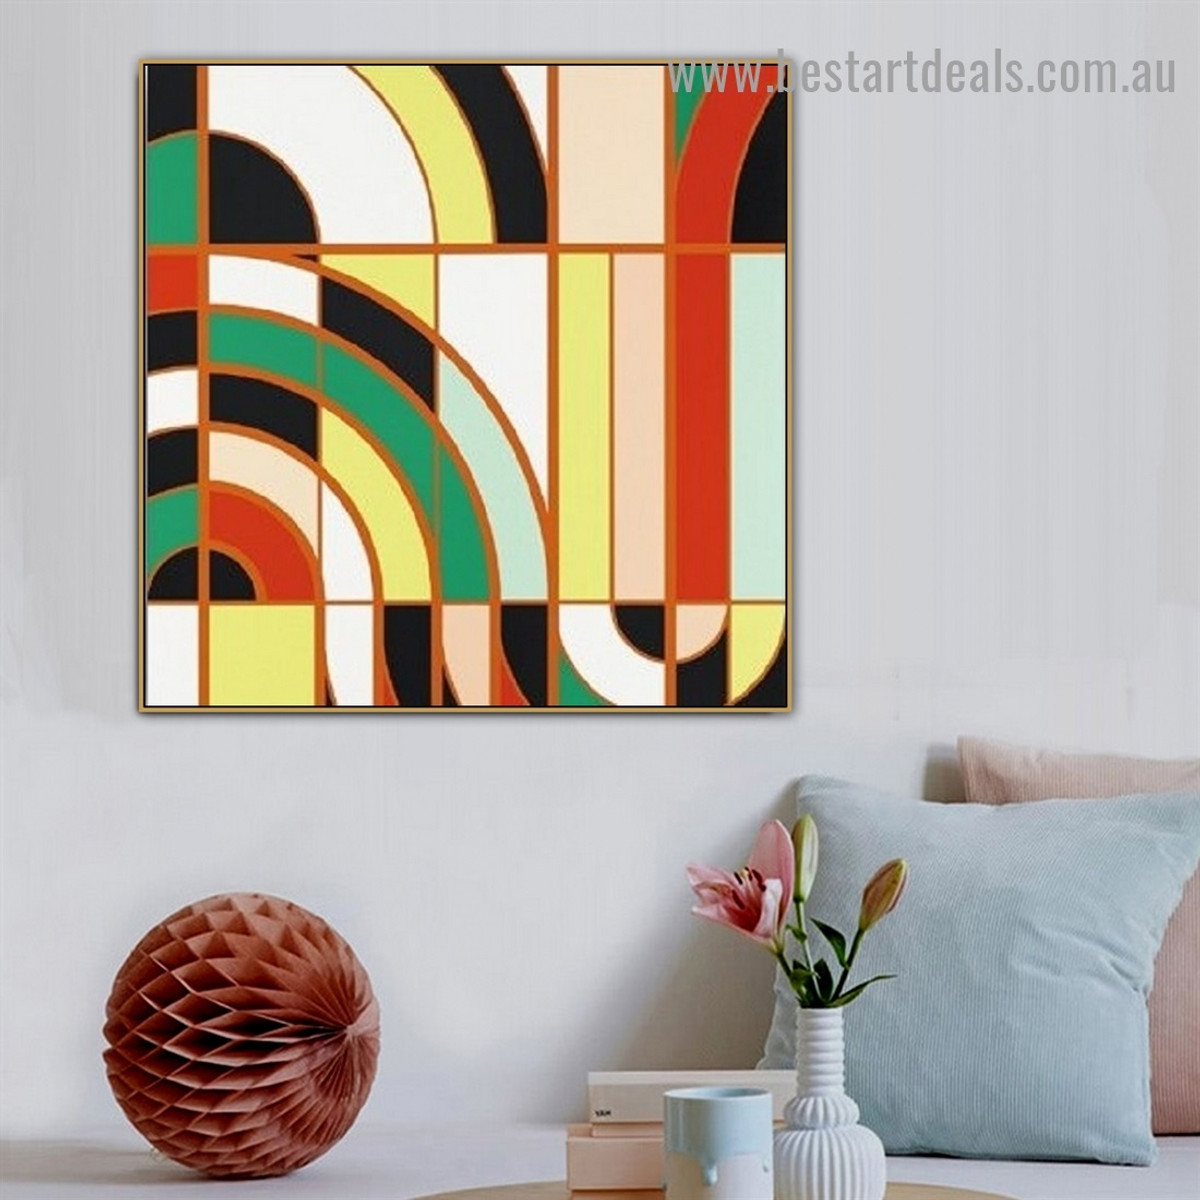 Curved Straight Design Abstract Modern Framed Artwork Photo Canvas Print for Room Wall Ornament